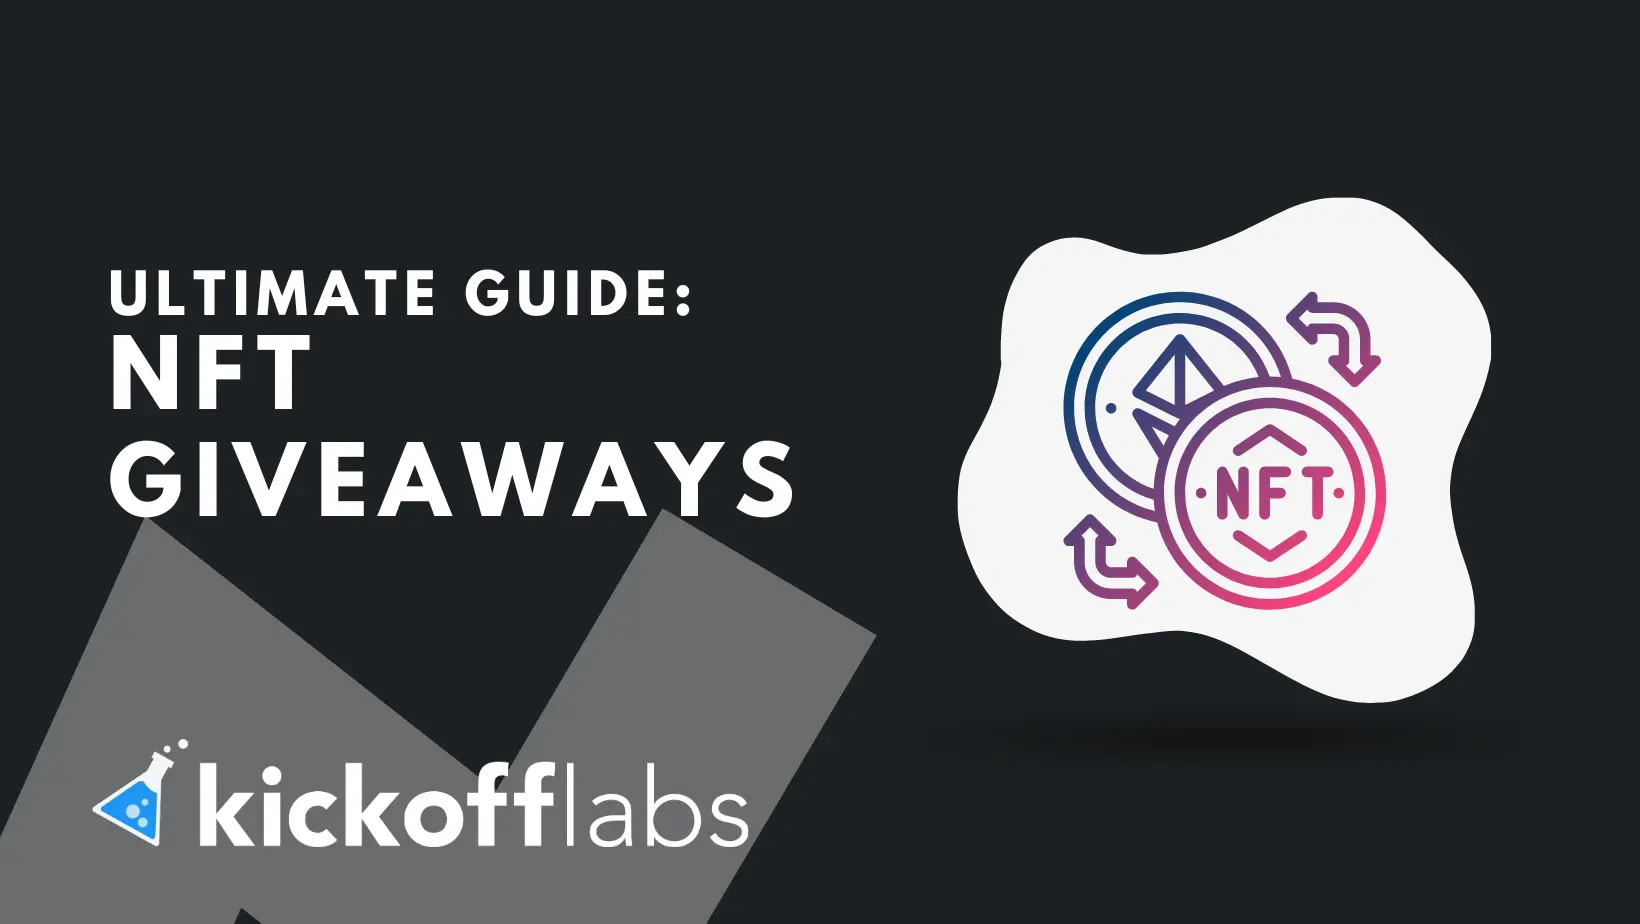 From NFT Launch to Brand Boost - The Giveaway Guide